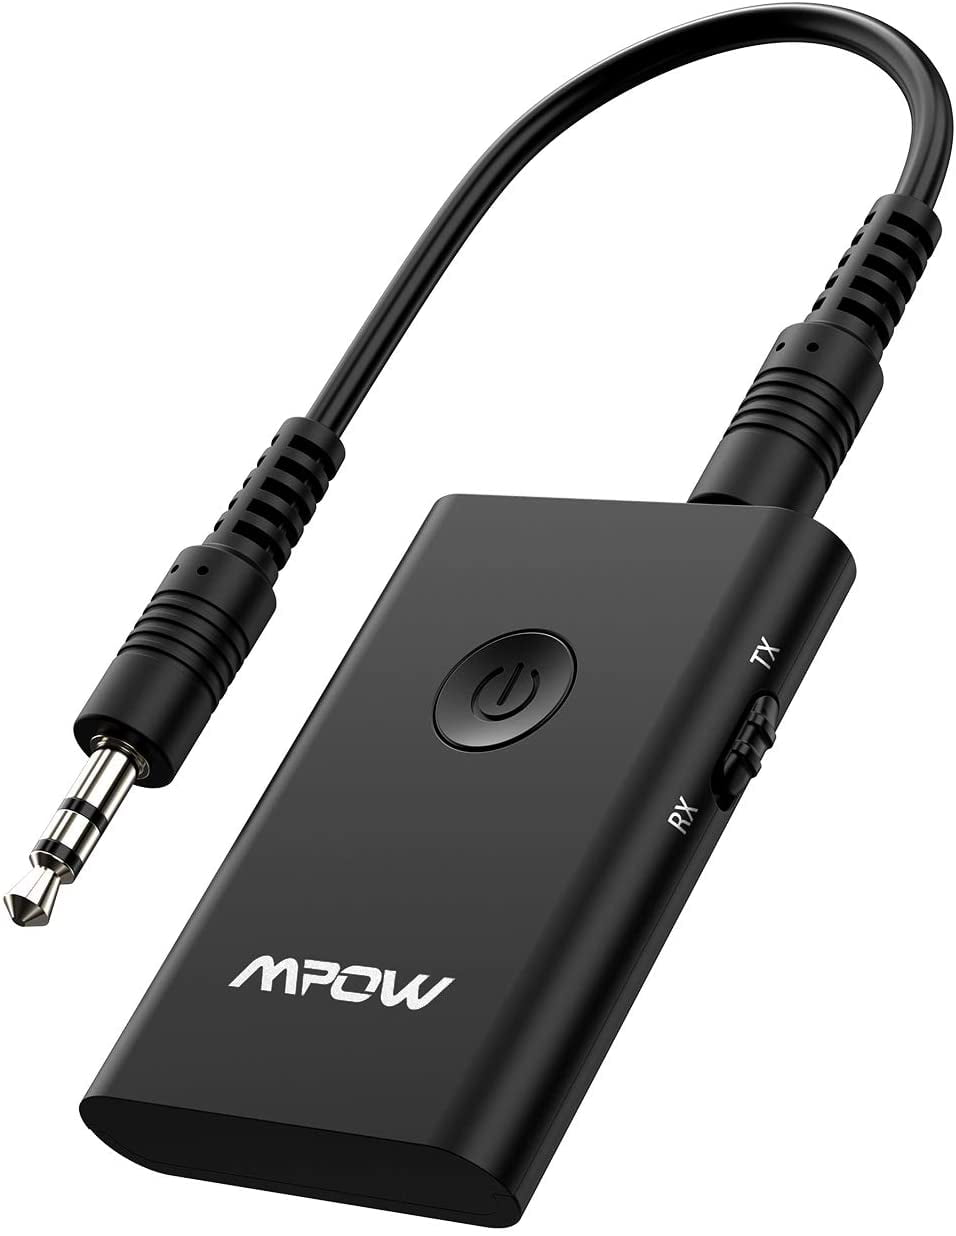 Mpow 3.5mm Wireless Bluetooth Receiver For Aux Stereo Audio Music Car Adapter 